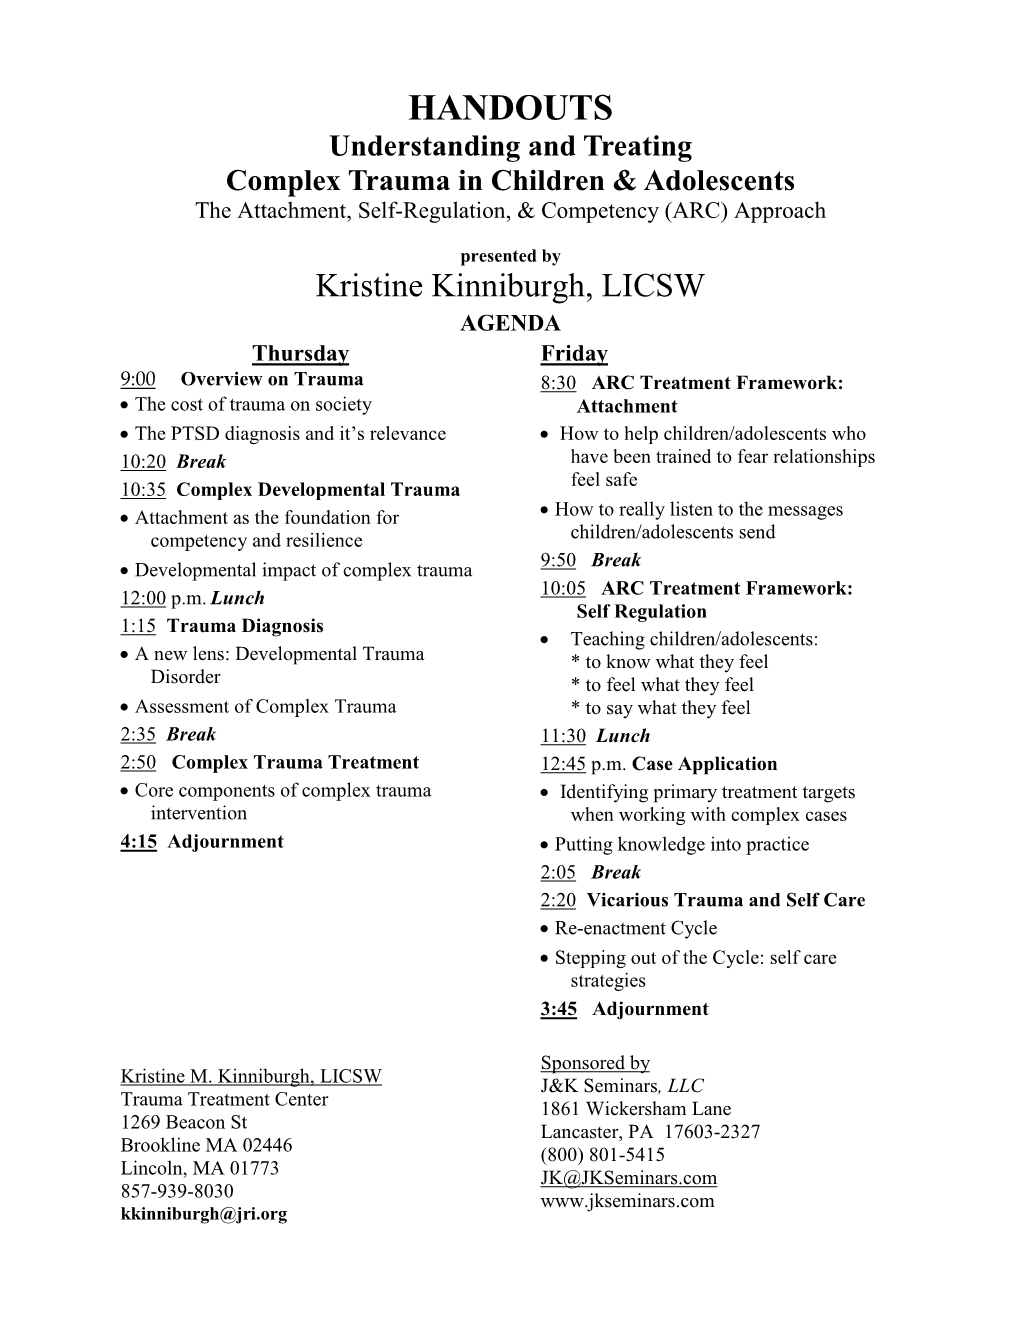 Handouts for Understanding and Treating Complex Trauma In